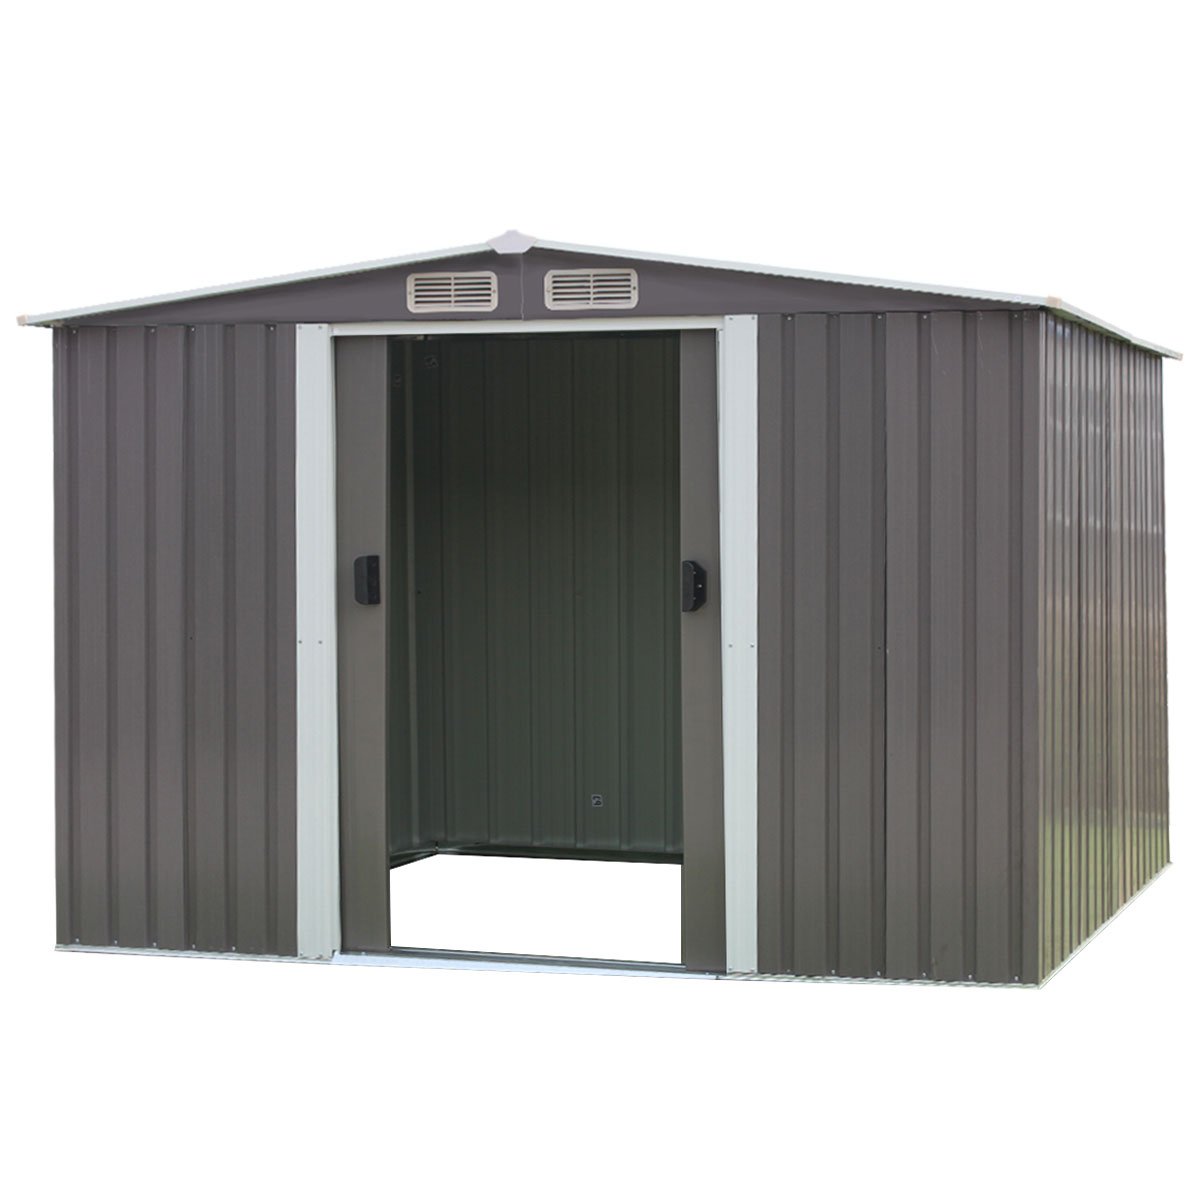 Shed Wallaroo Garden Shed Gable Roof 8ft x 8ft Outdoor Storage - Grey